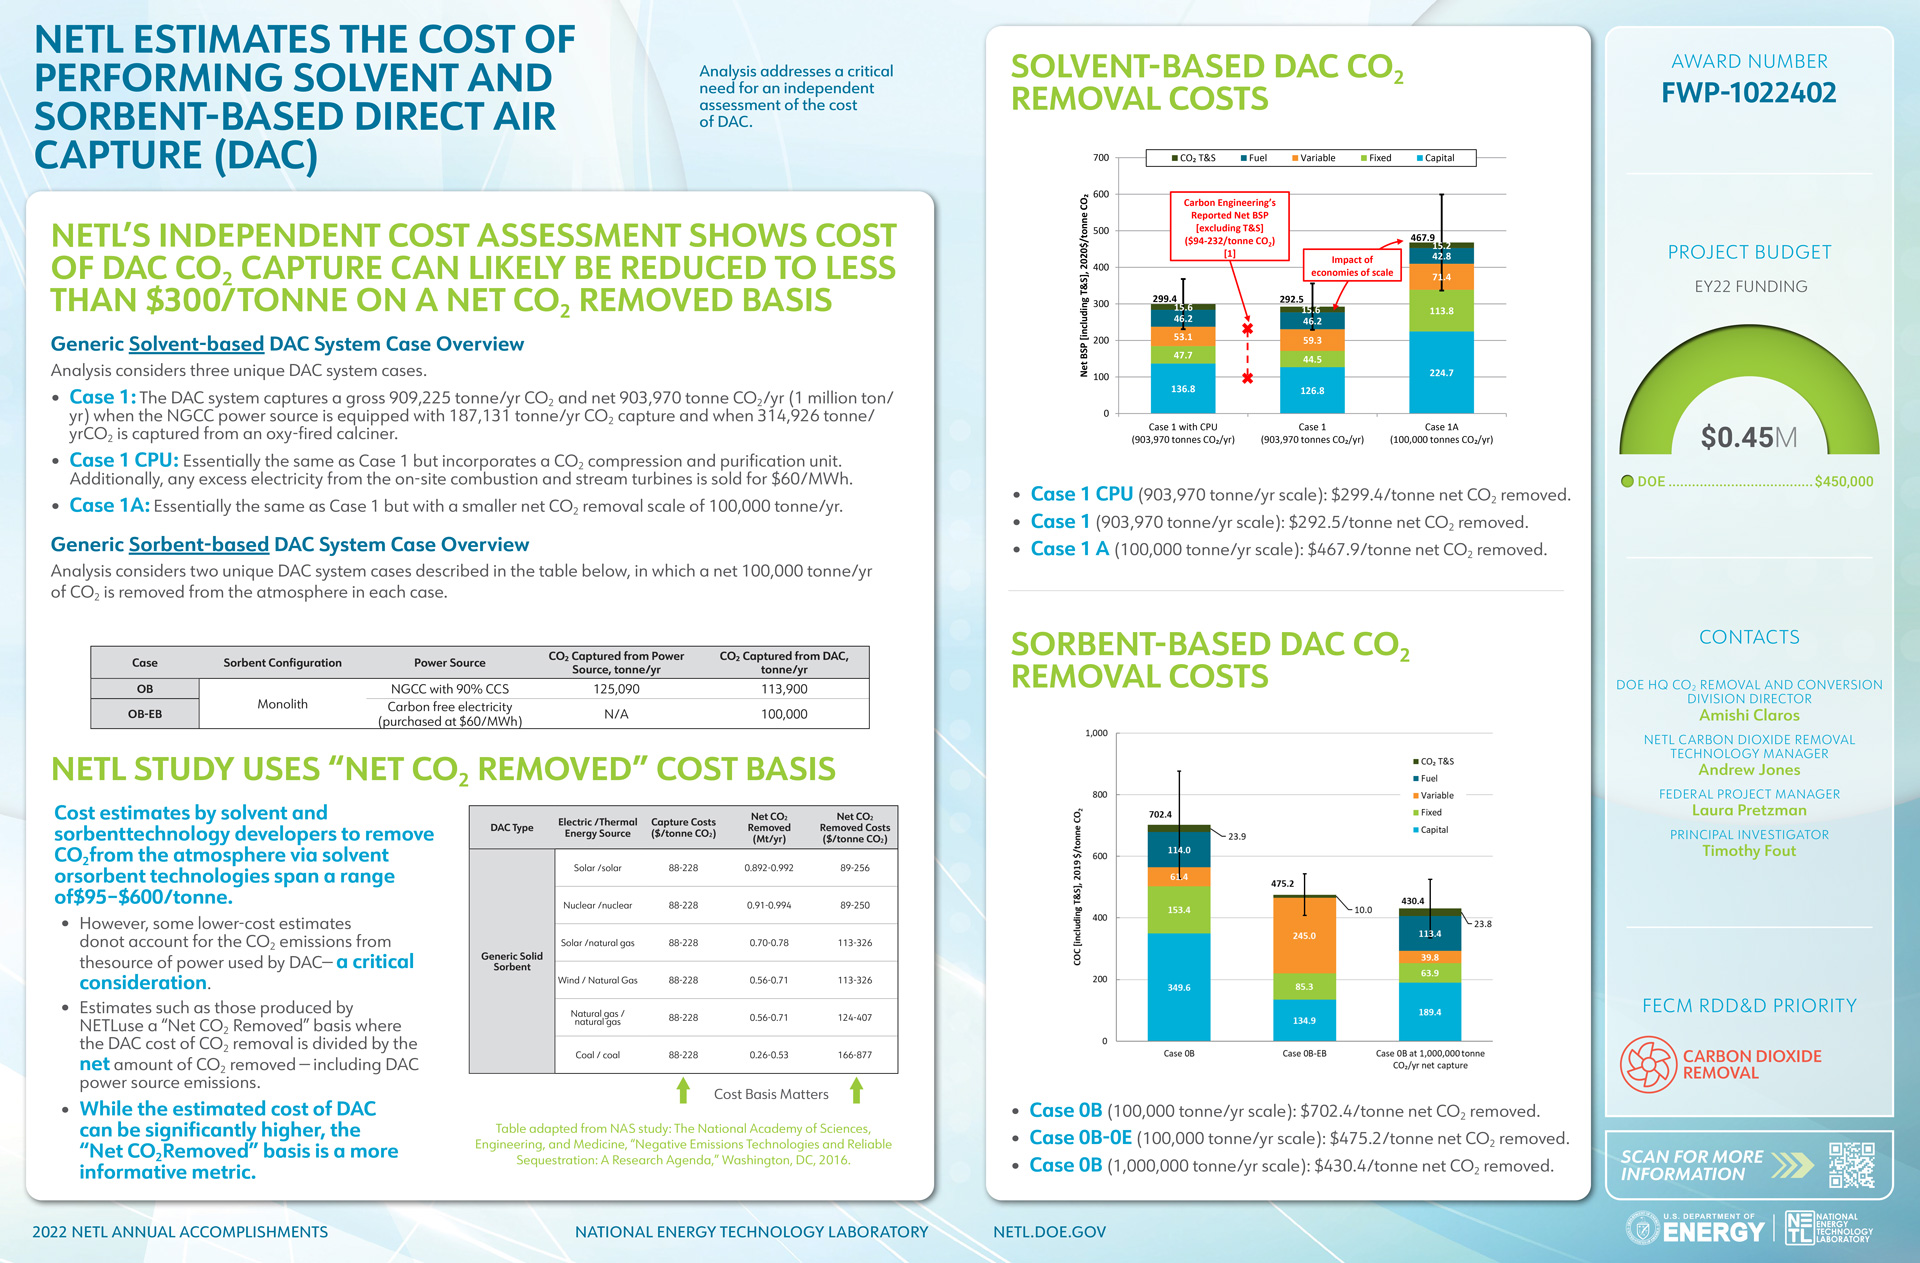 NETL Estimates the Cost of Performing Solvent and Sorbent-based Direct Air Capture (DAC ) 